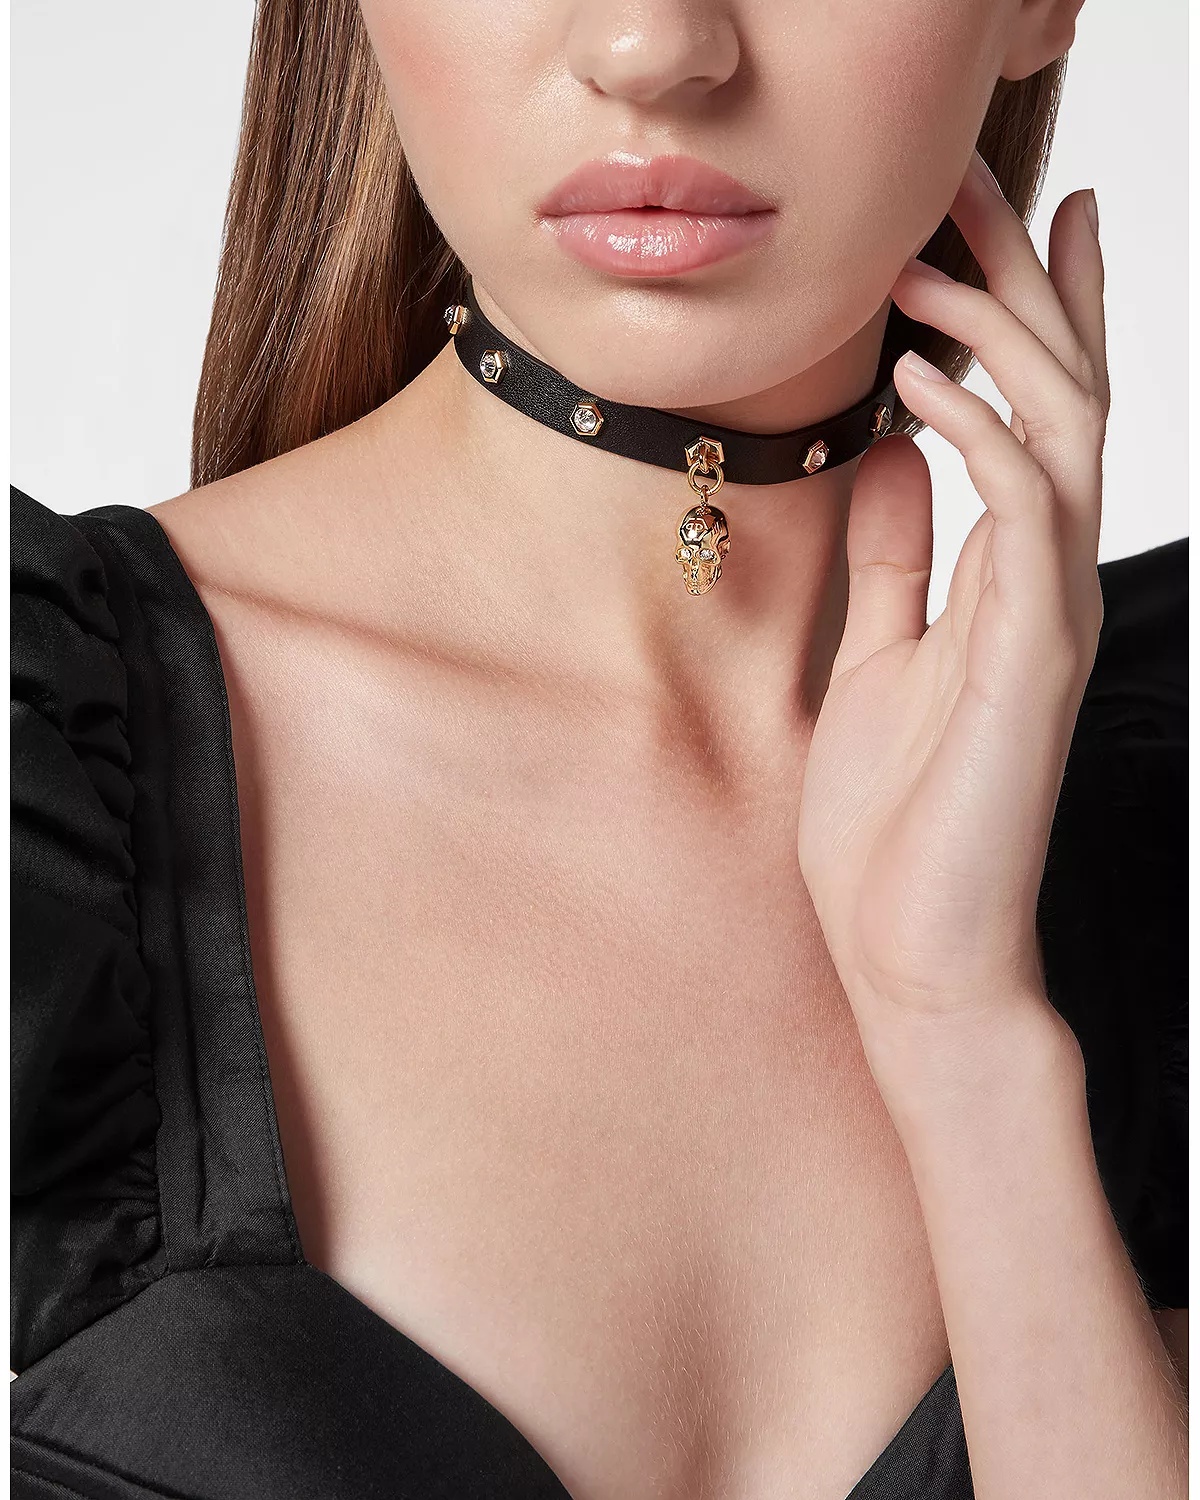 3D $kull Crystal Studded Leather Choker Necklace, 15" - 2